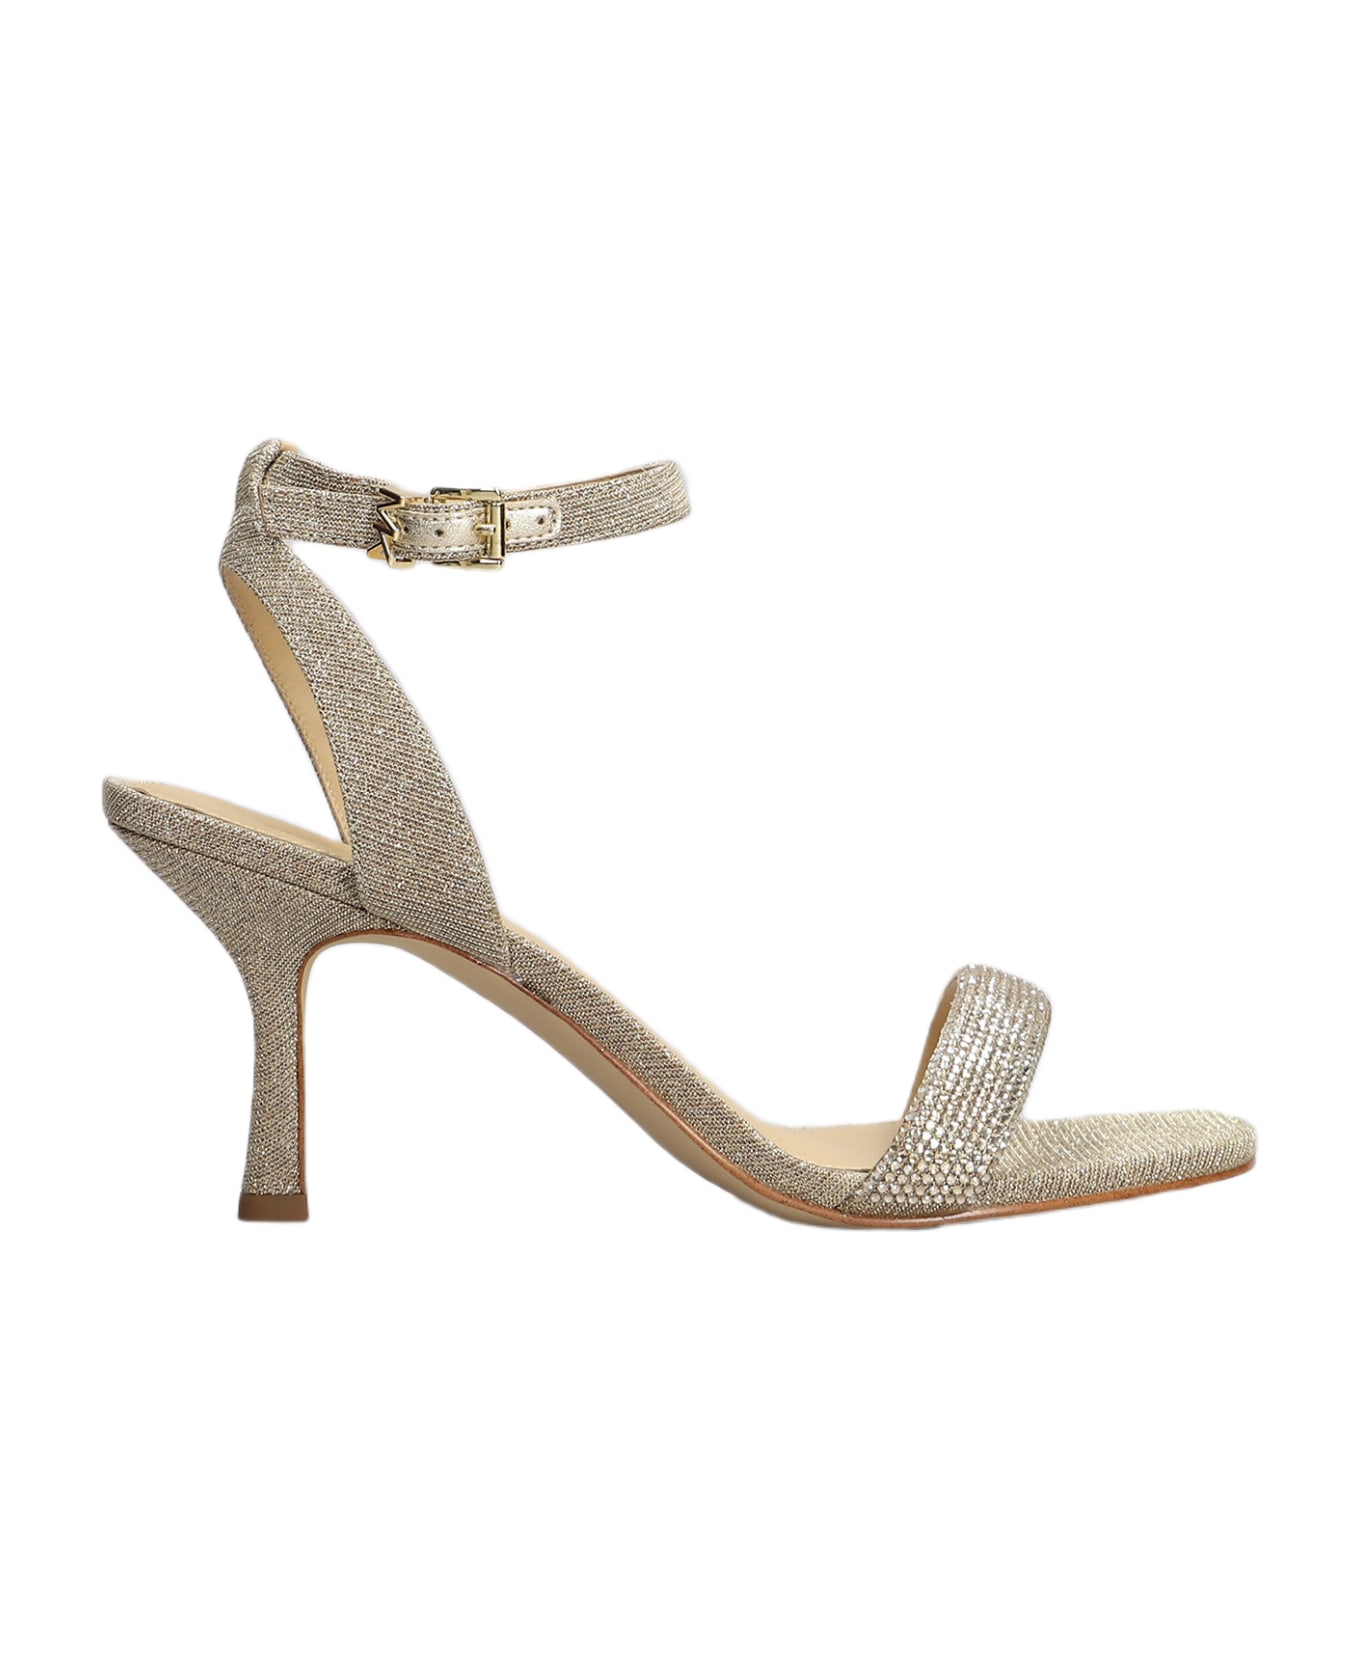 Michael Kors Carrie Sandals In Gold Glitter - gold サンダル